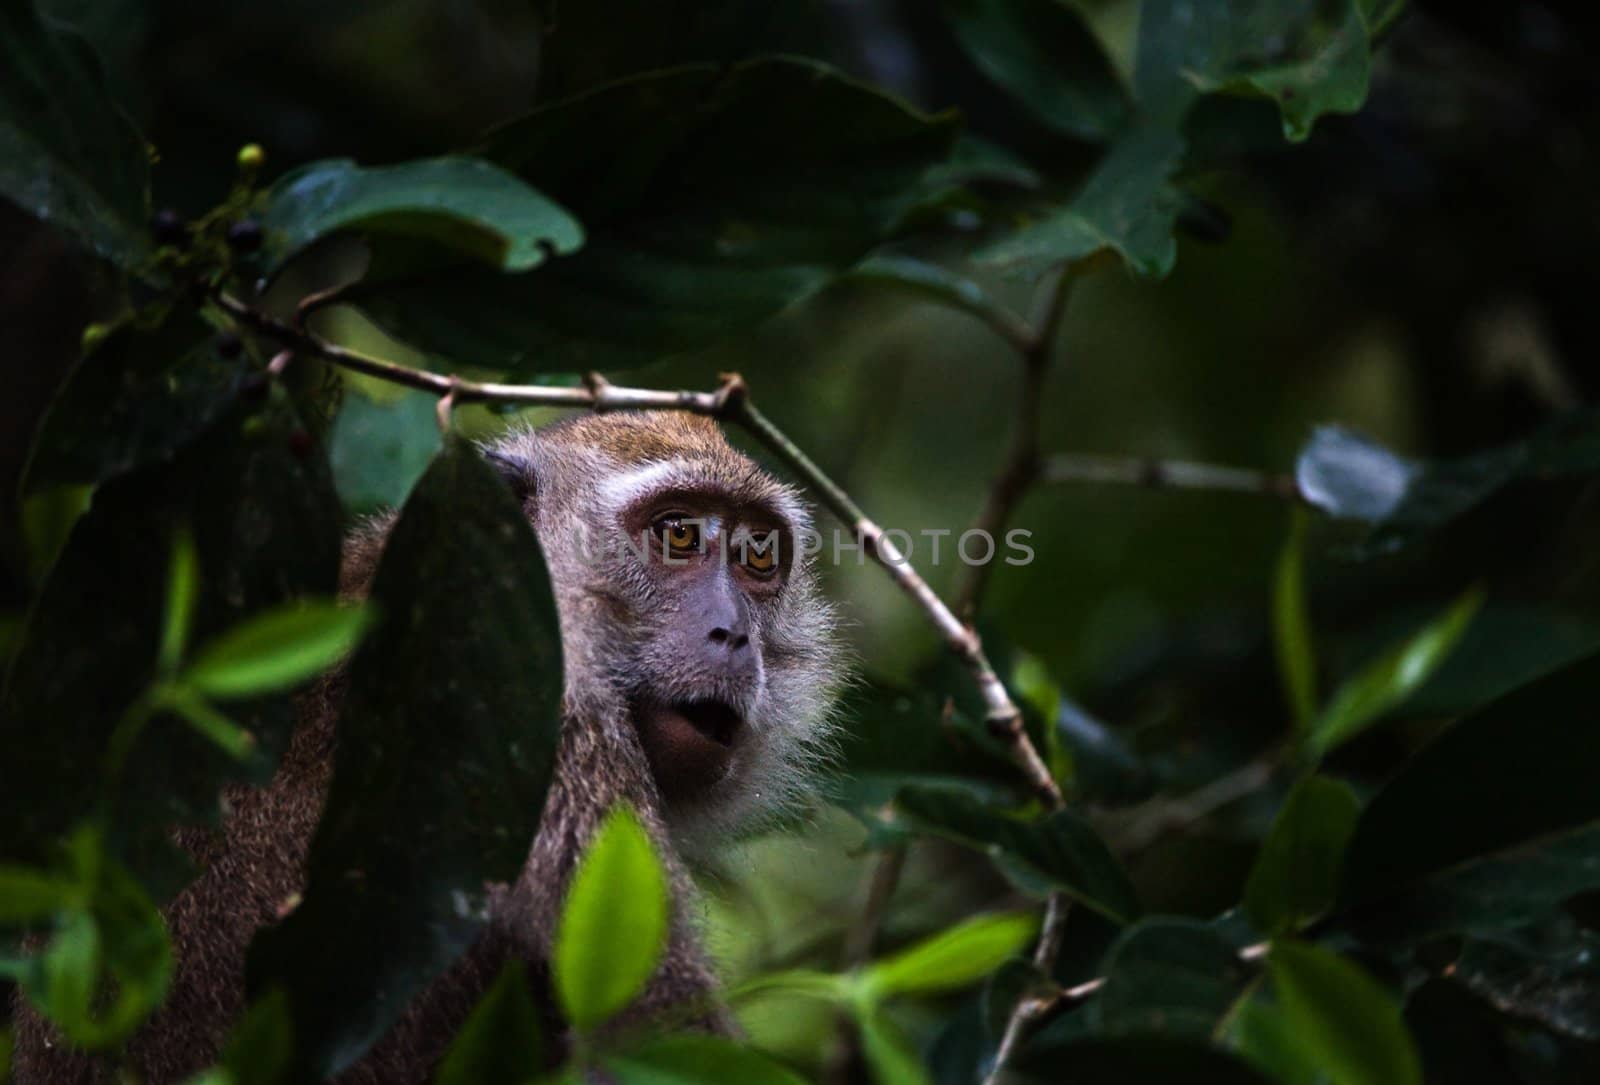 The monkey hides in tree branches./ by SURZ